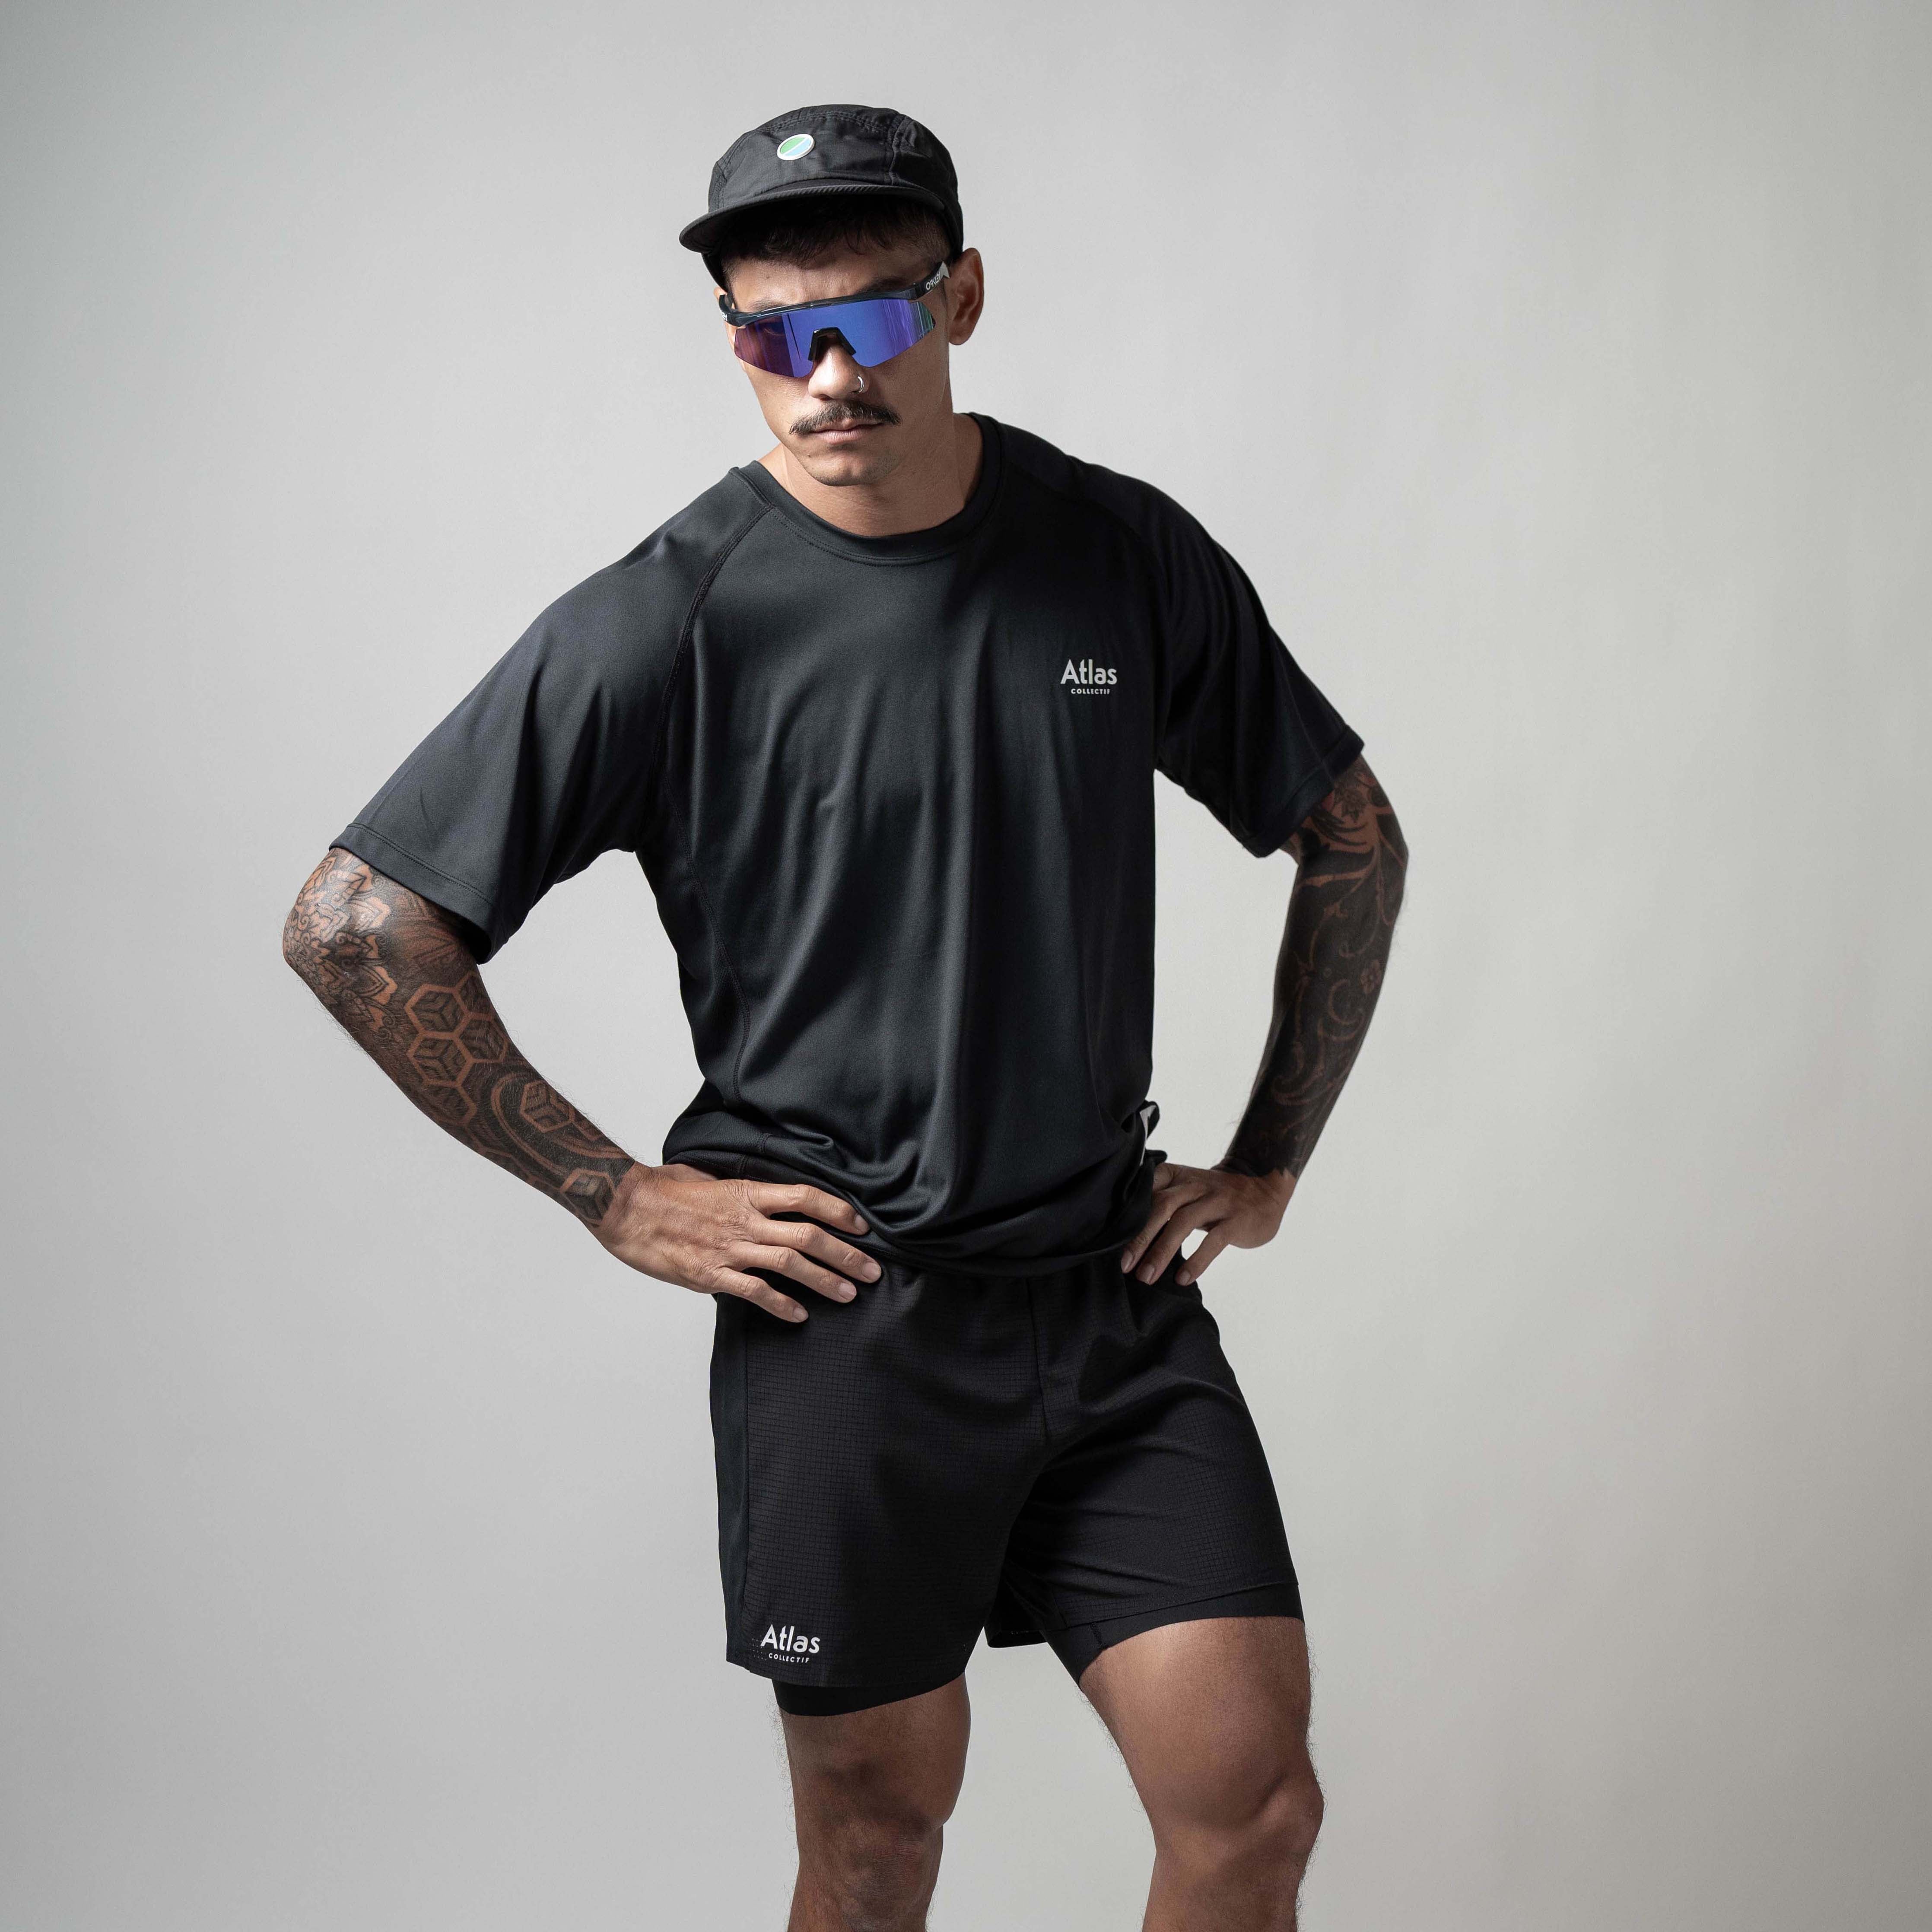 Shorts Black 2 Core Collectif - in Running Atlas 1